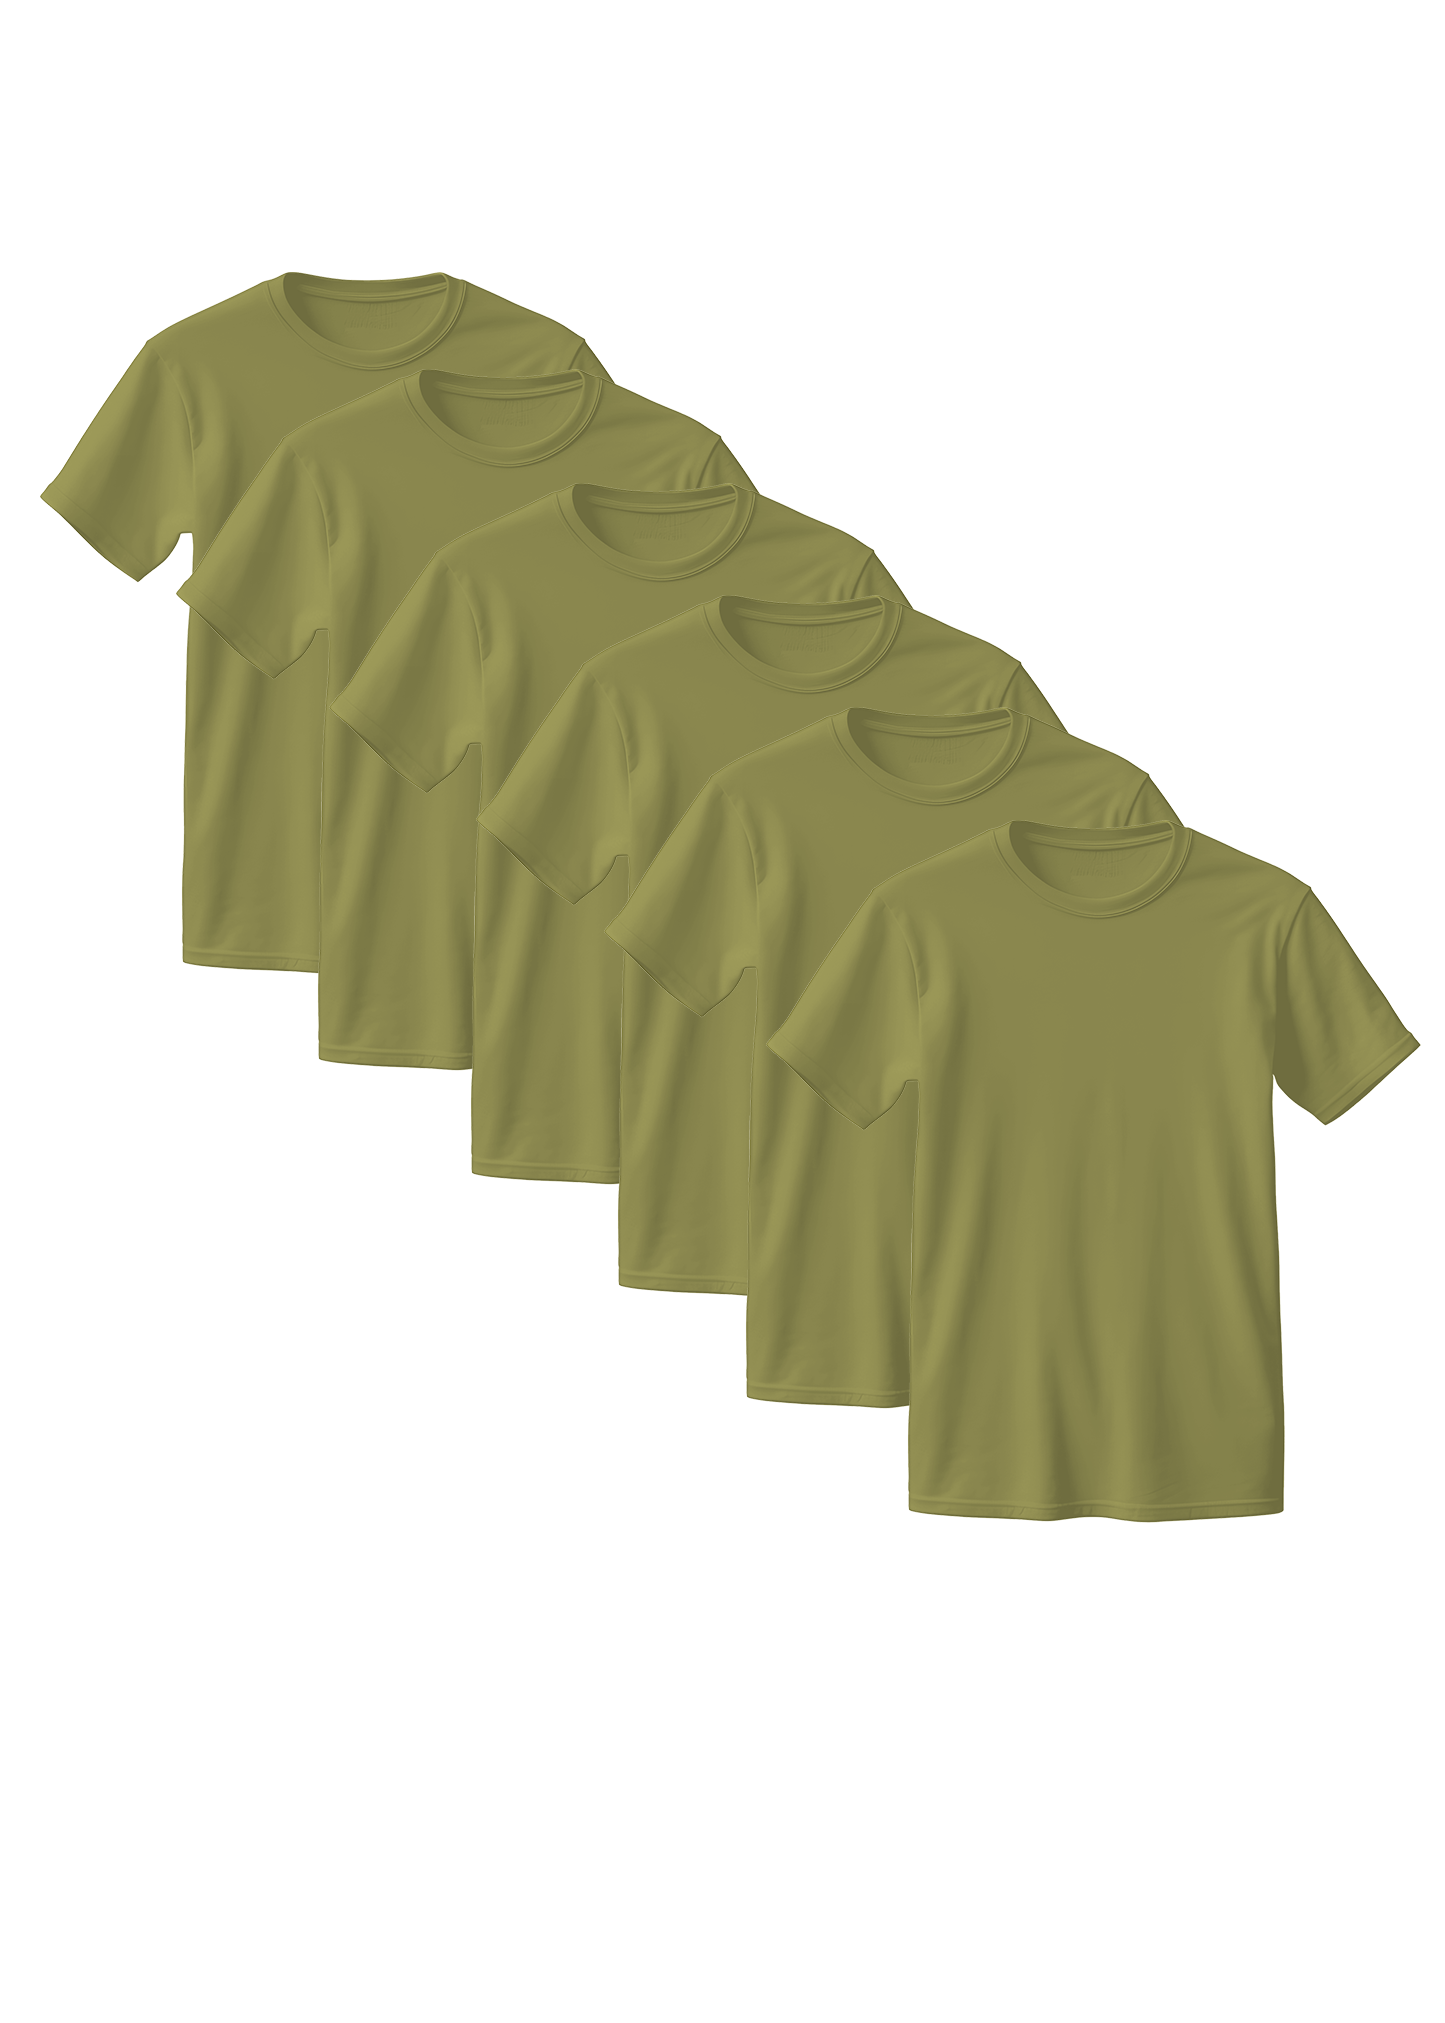 Olive Green Combed Cotton T-Shirt 6-Pack